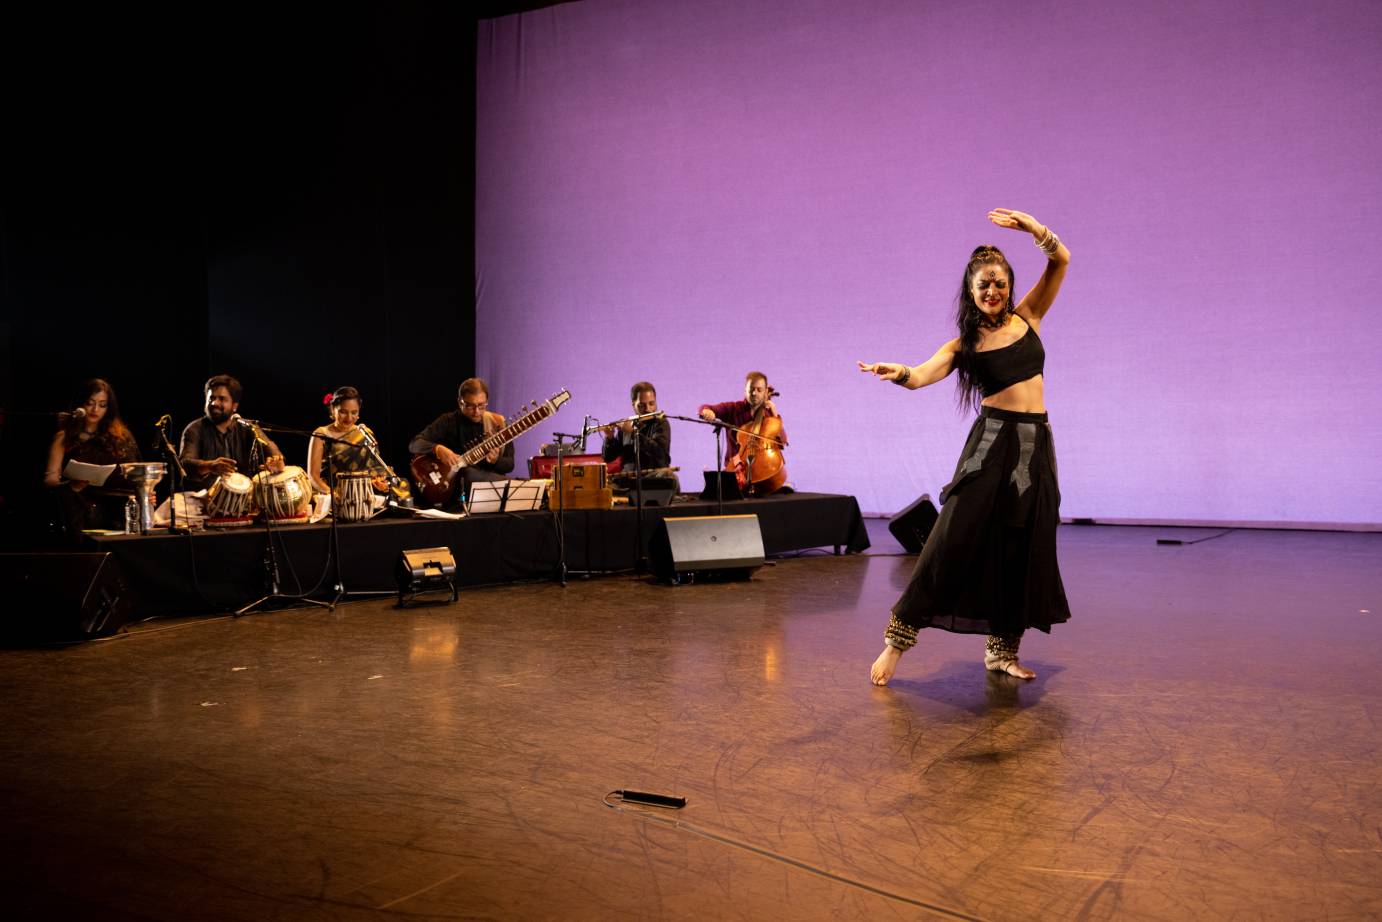 Woman in abbreviated black top and black skirt dancing in front of six musicians.